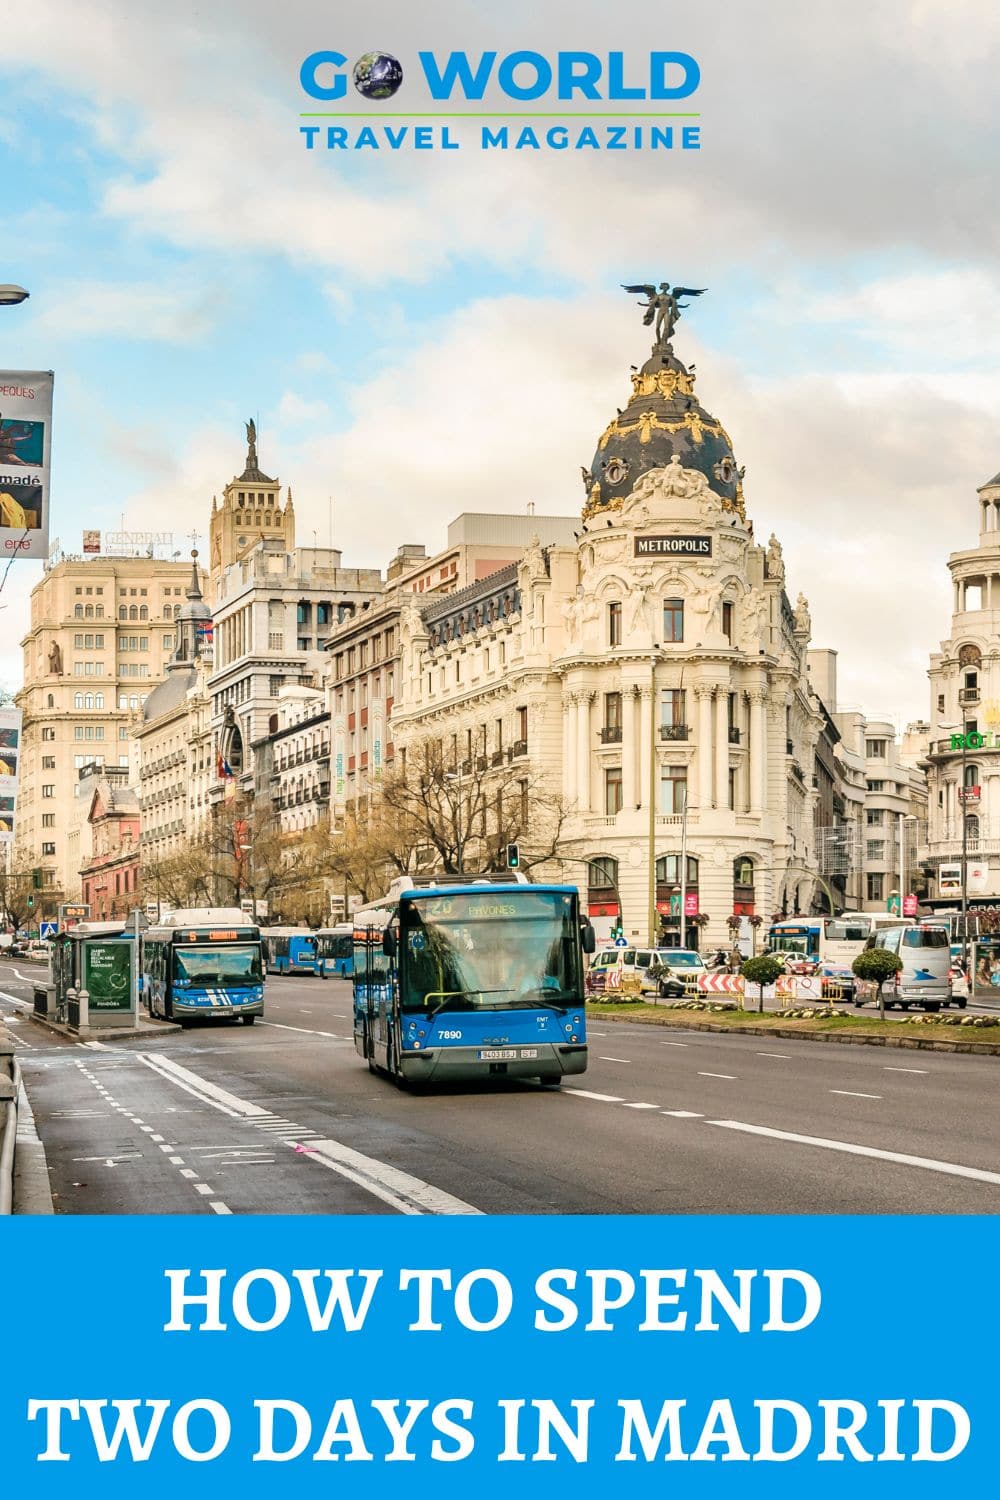 Often overlooked by visitors to Spain, here are examples of the many ways to spend 2 days in Madrid that will show why it shouldn't be missed. #Madrid #Spain